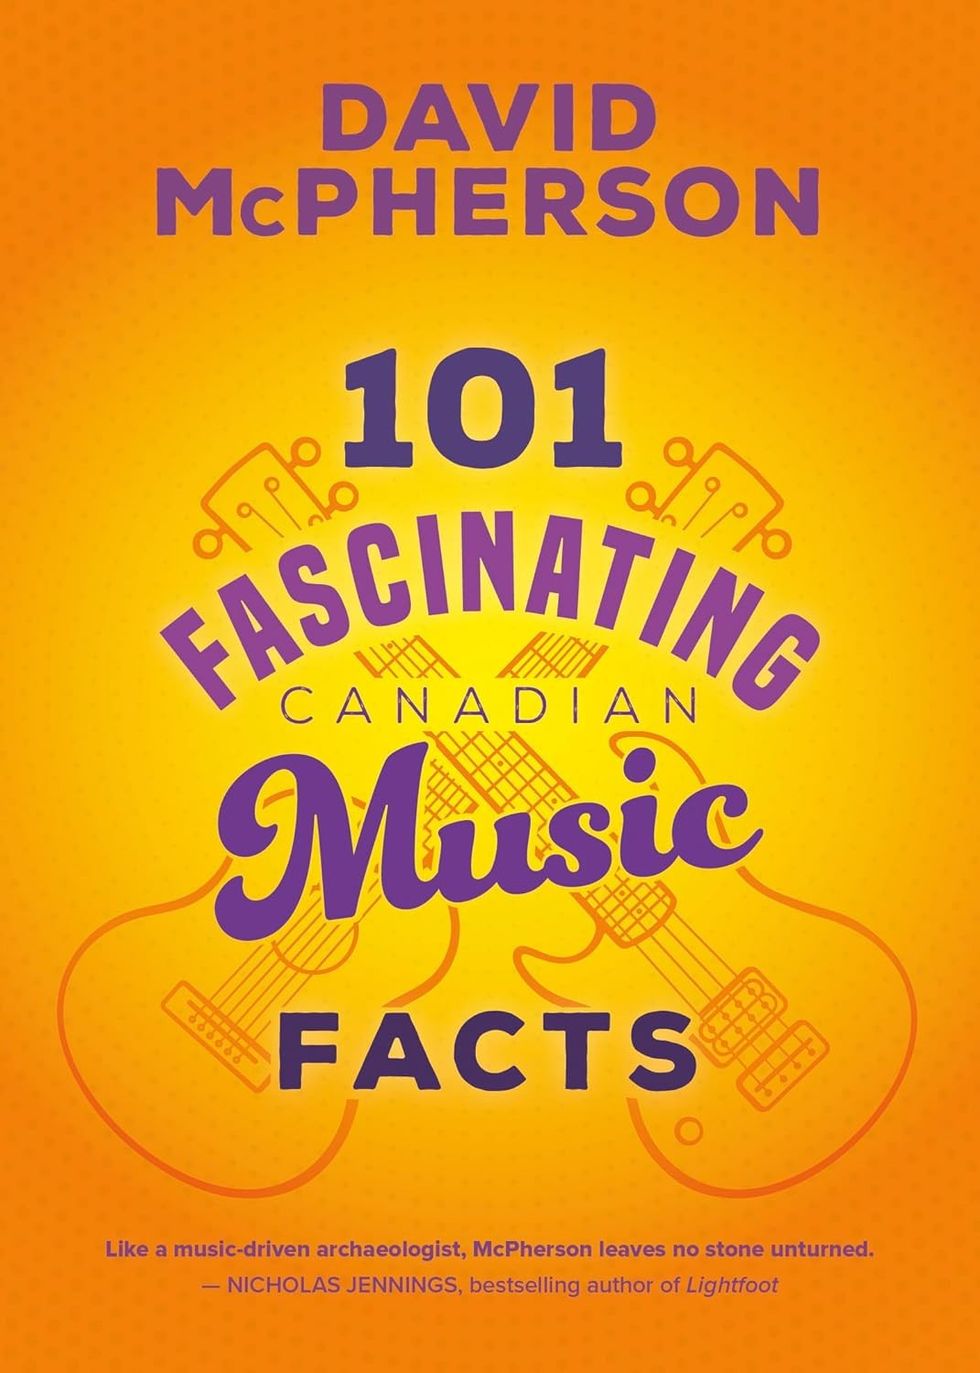 A Podcast Conversation With... David McPherson 